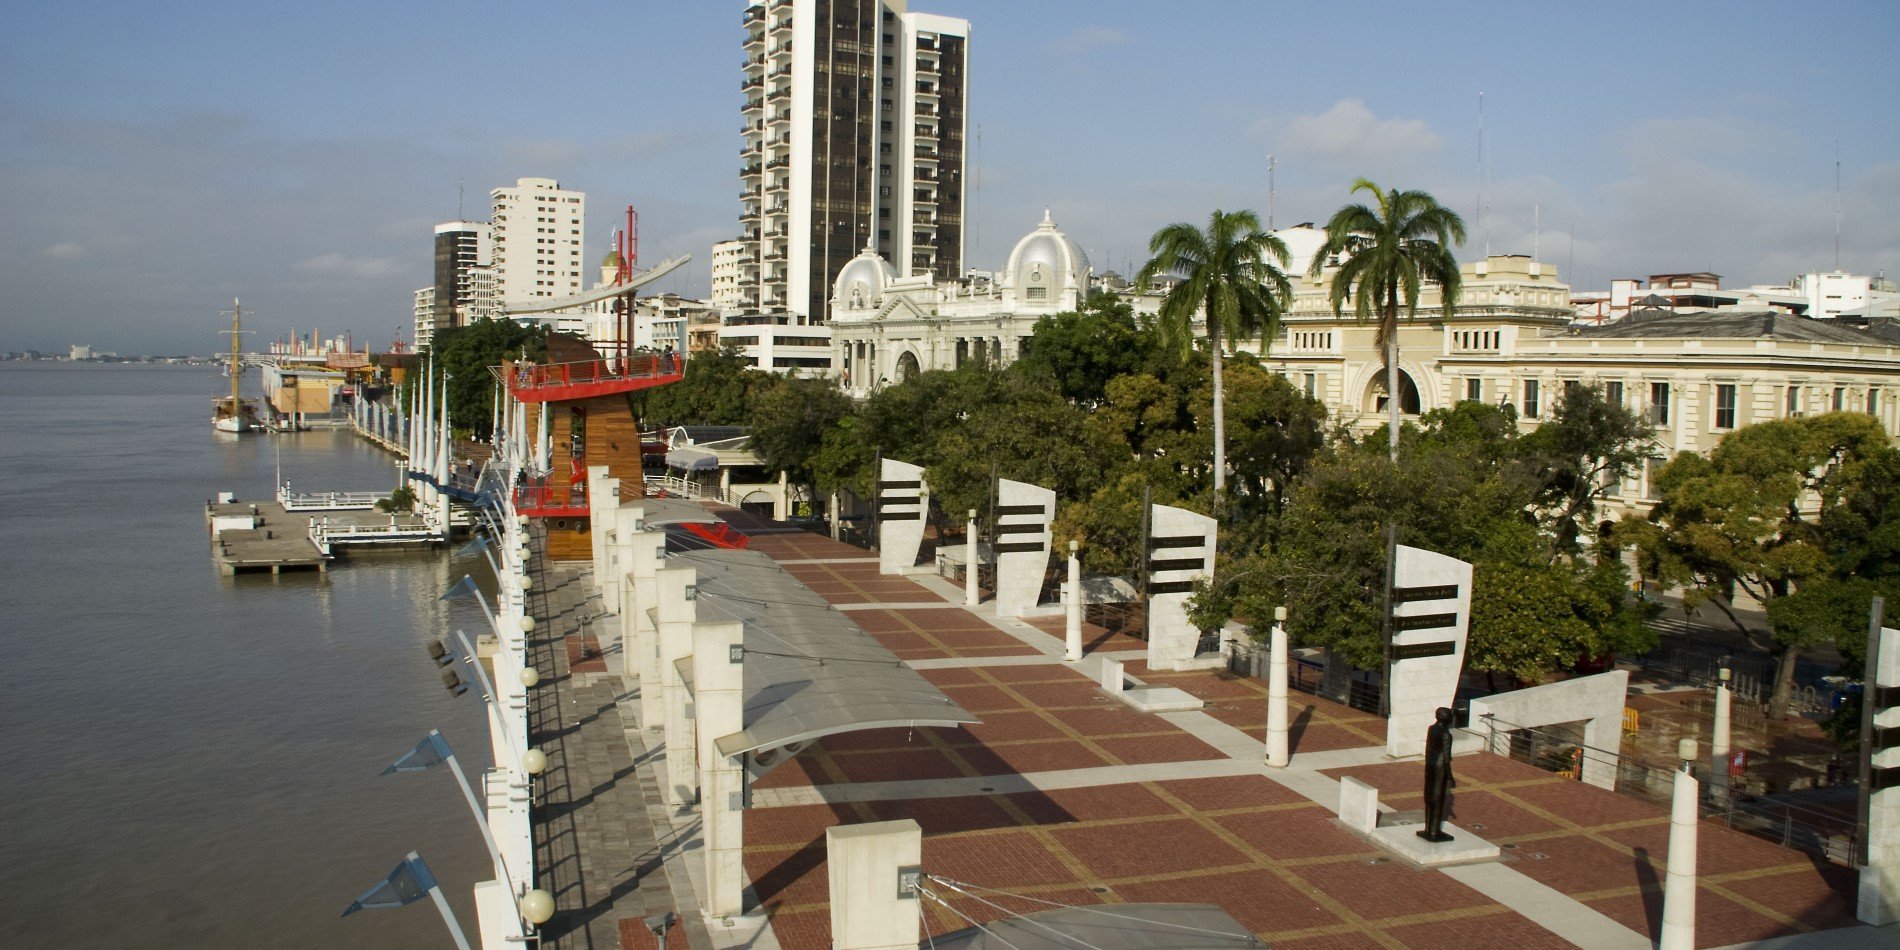 
The famous boardwalk Malecon 2000 in Guayaquil, Ecuador